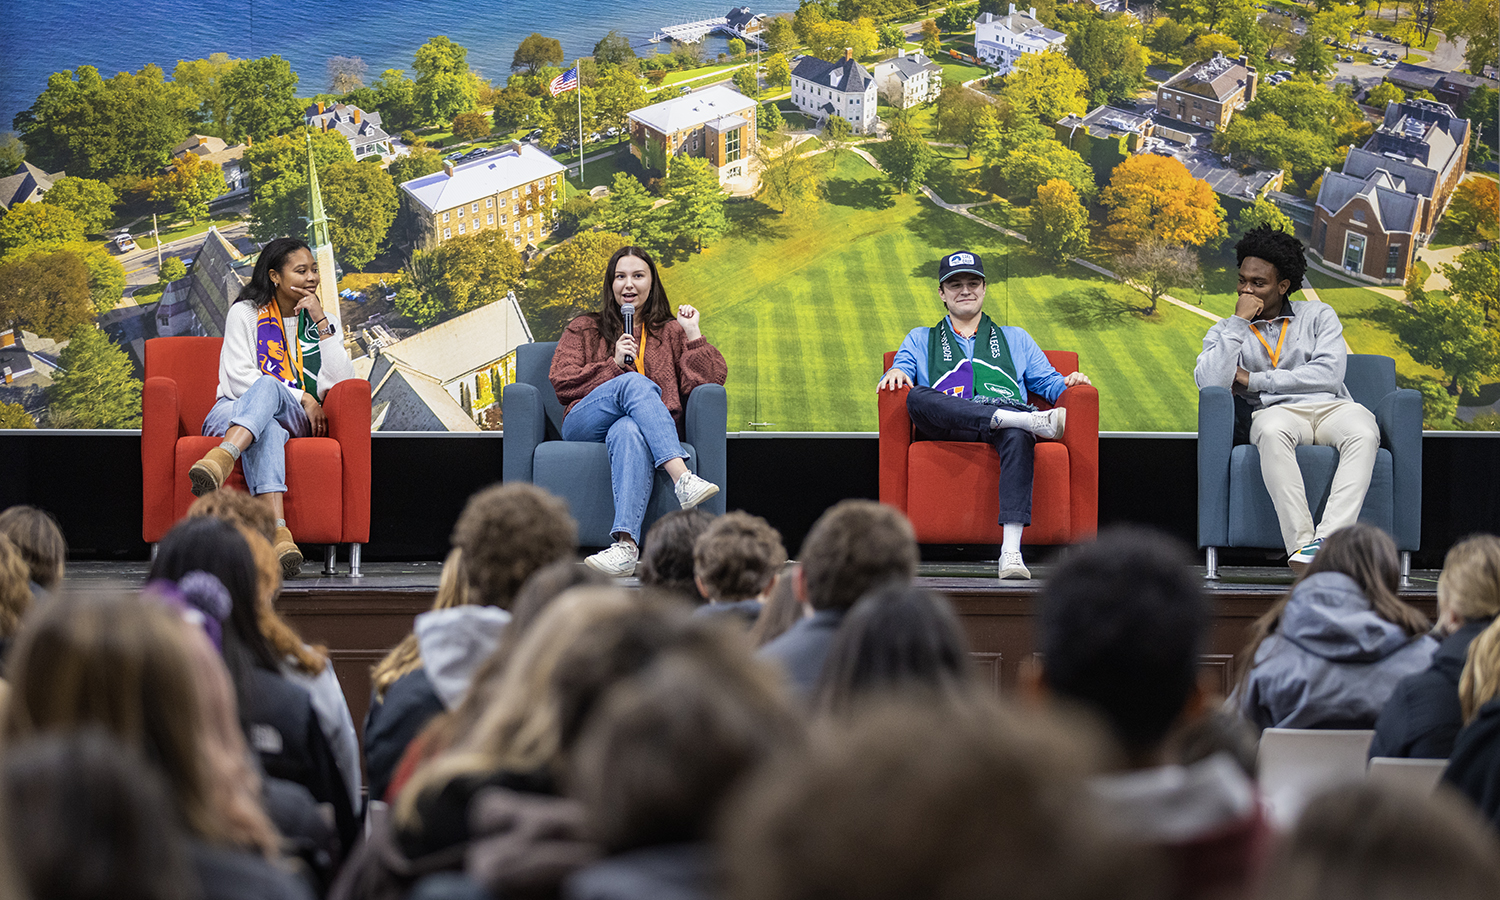 Tia Thevenin ’23, Katie Brown ’23, Will Ailing-Ganey ’23 and Abdoulaye Diallo ’23 talk with prospective students during the Admitted Student Open House on Saturday.